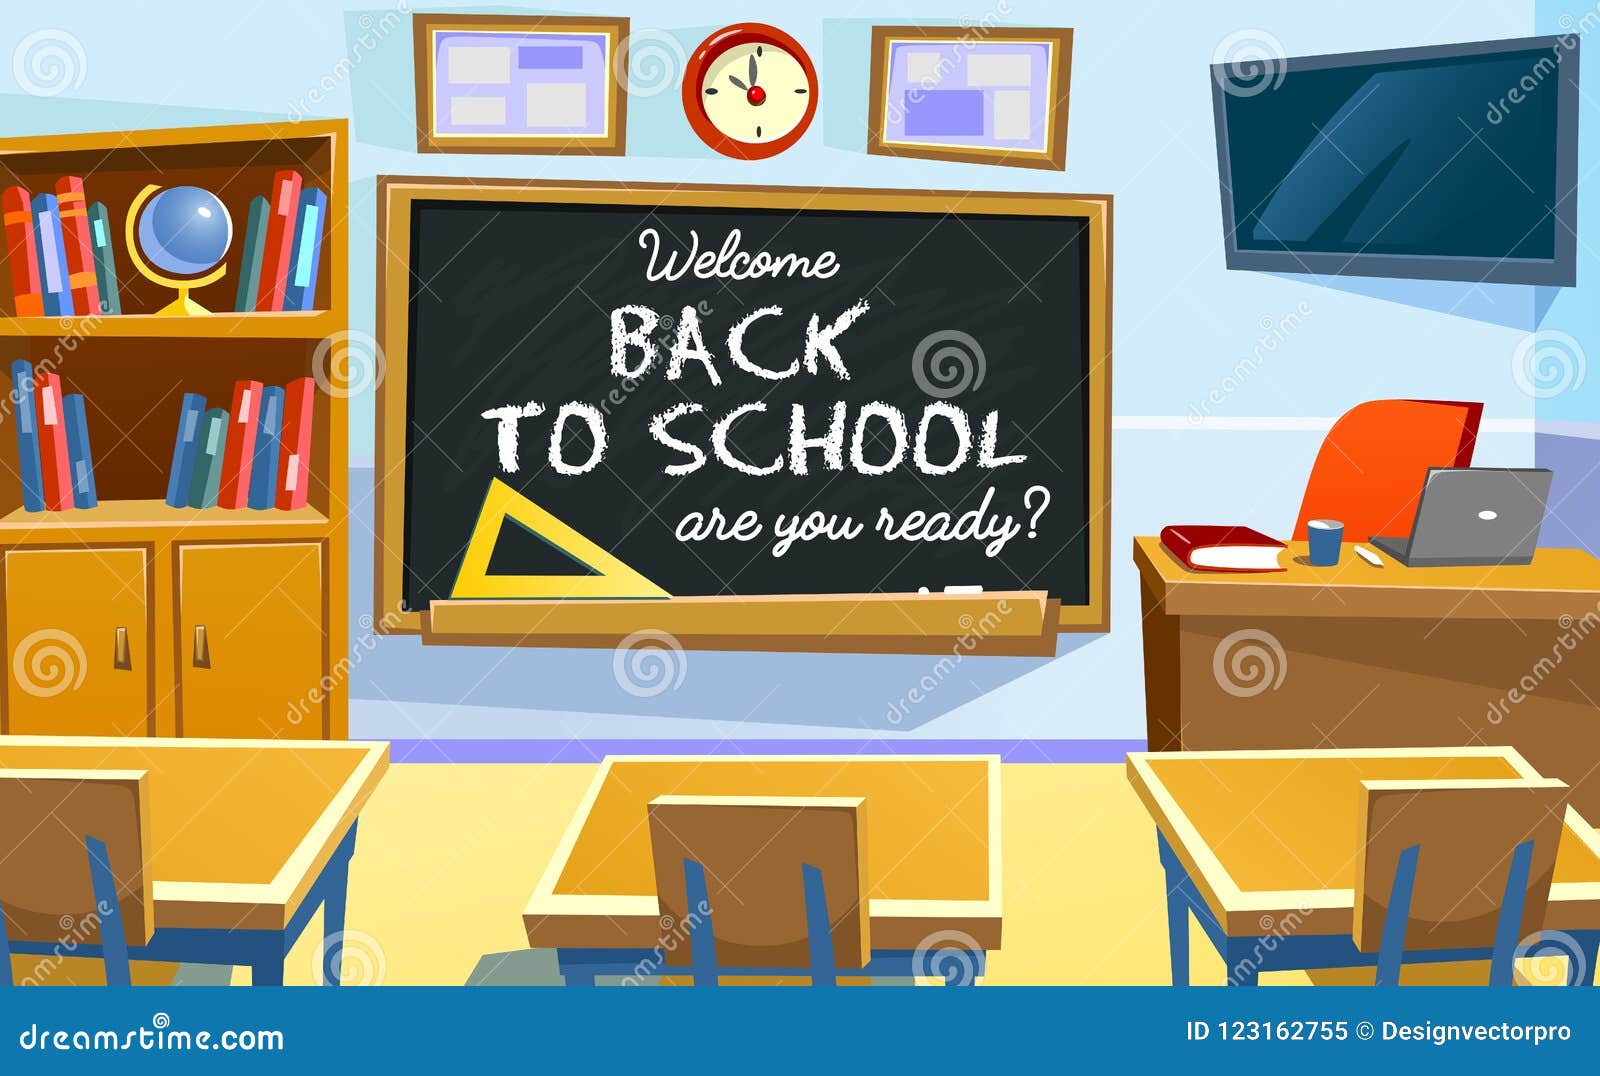 Welcome Back To School Poster With Empty Classroom Cartoon School Illustration Stock Vector Illustration Of Kids Concept